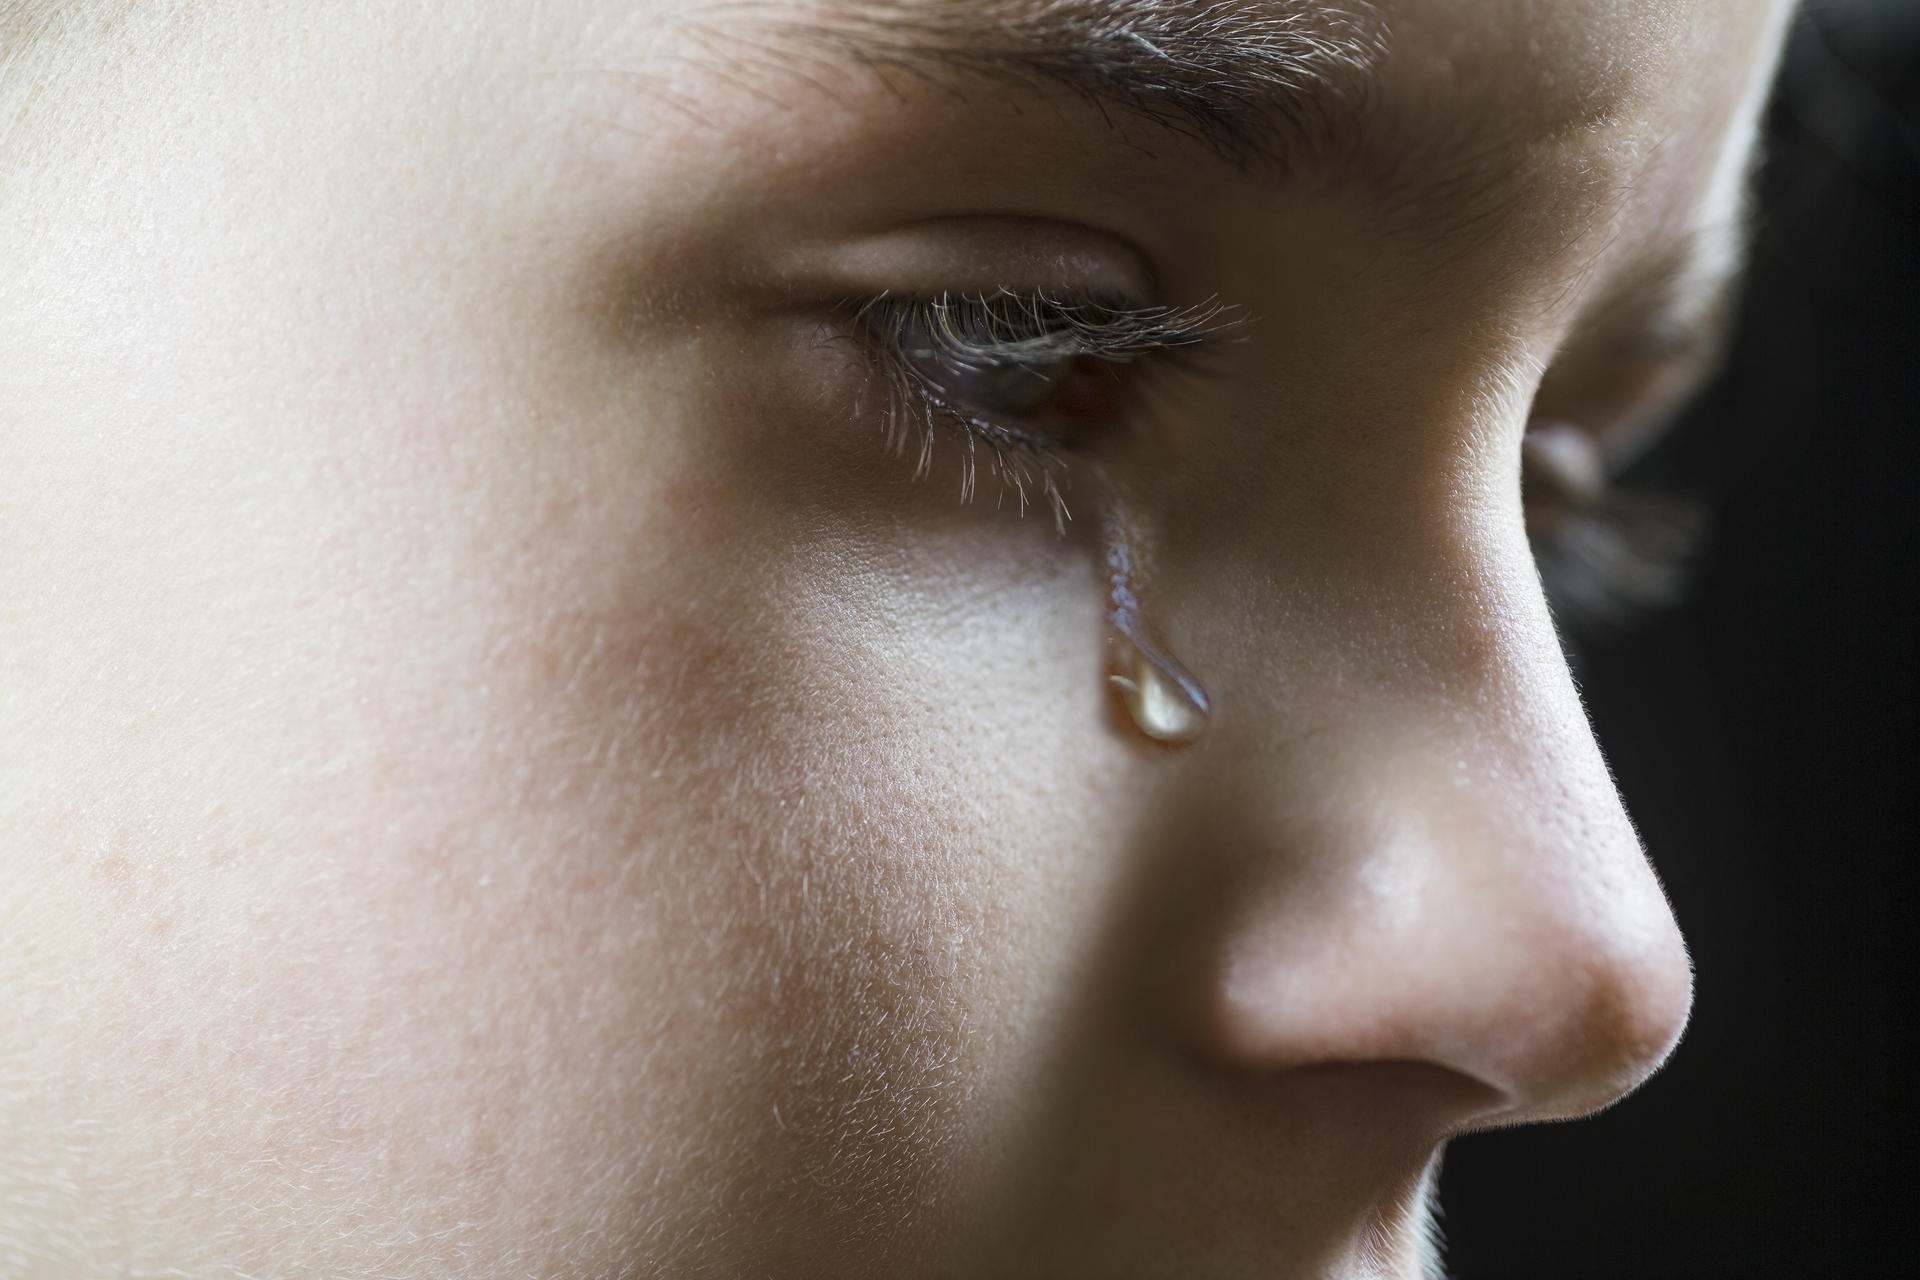 Bullying can cause students emotional stress. Photo: Corbis